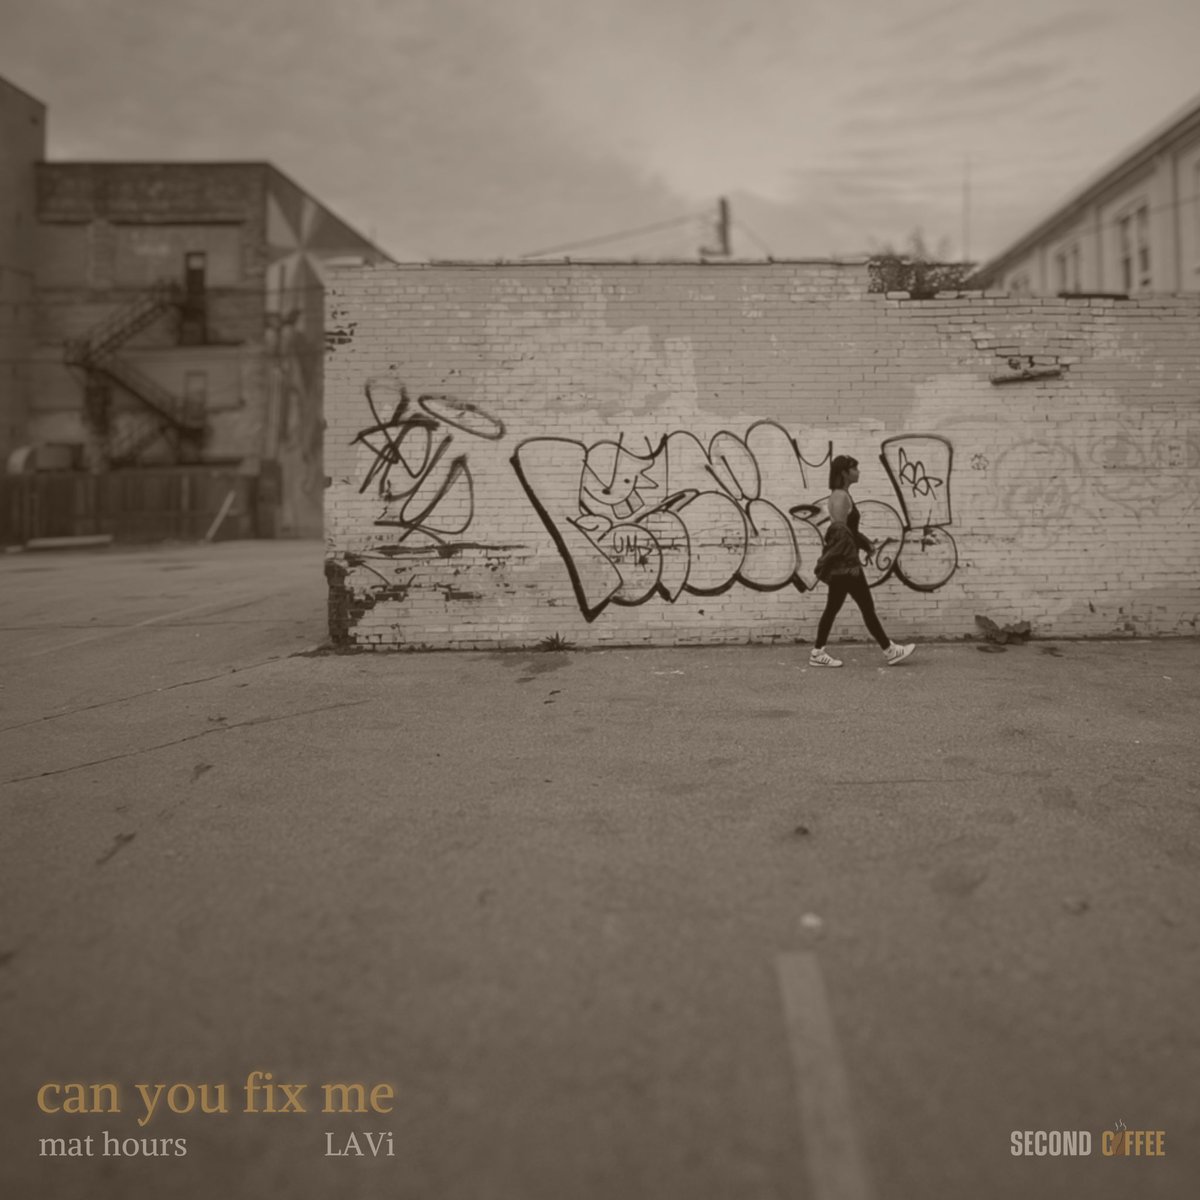 Can You Fix Me is out on Second Coffee Records ! So proud of this song we made with the talented LAVi. Enjoy LAVi's cosy and sweet vocals layered over a soft ukg beat, lofi textures and warm sub-bass lines cooked by me.